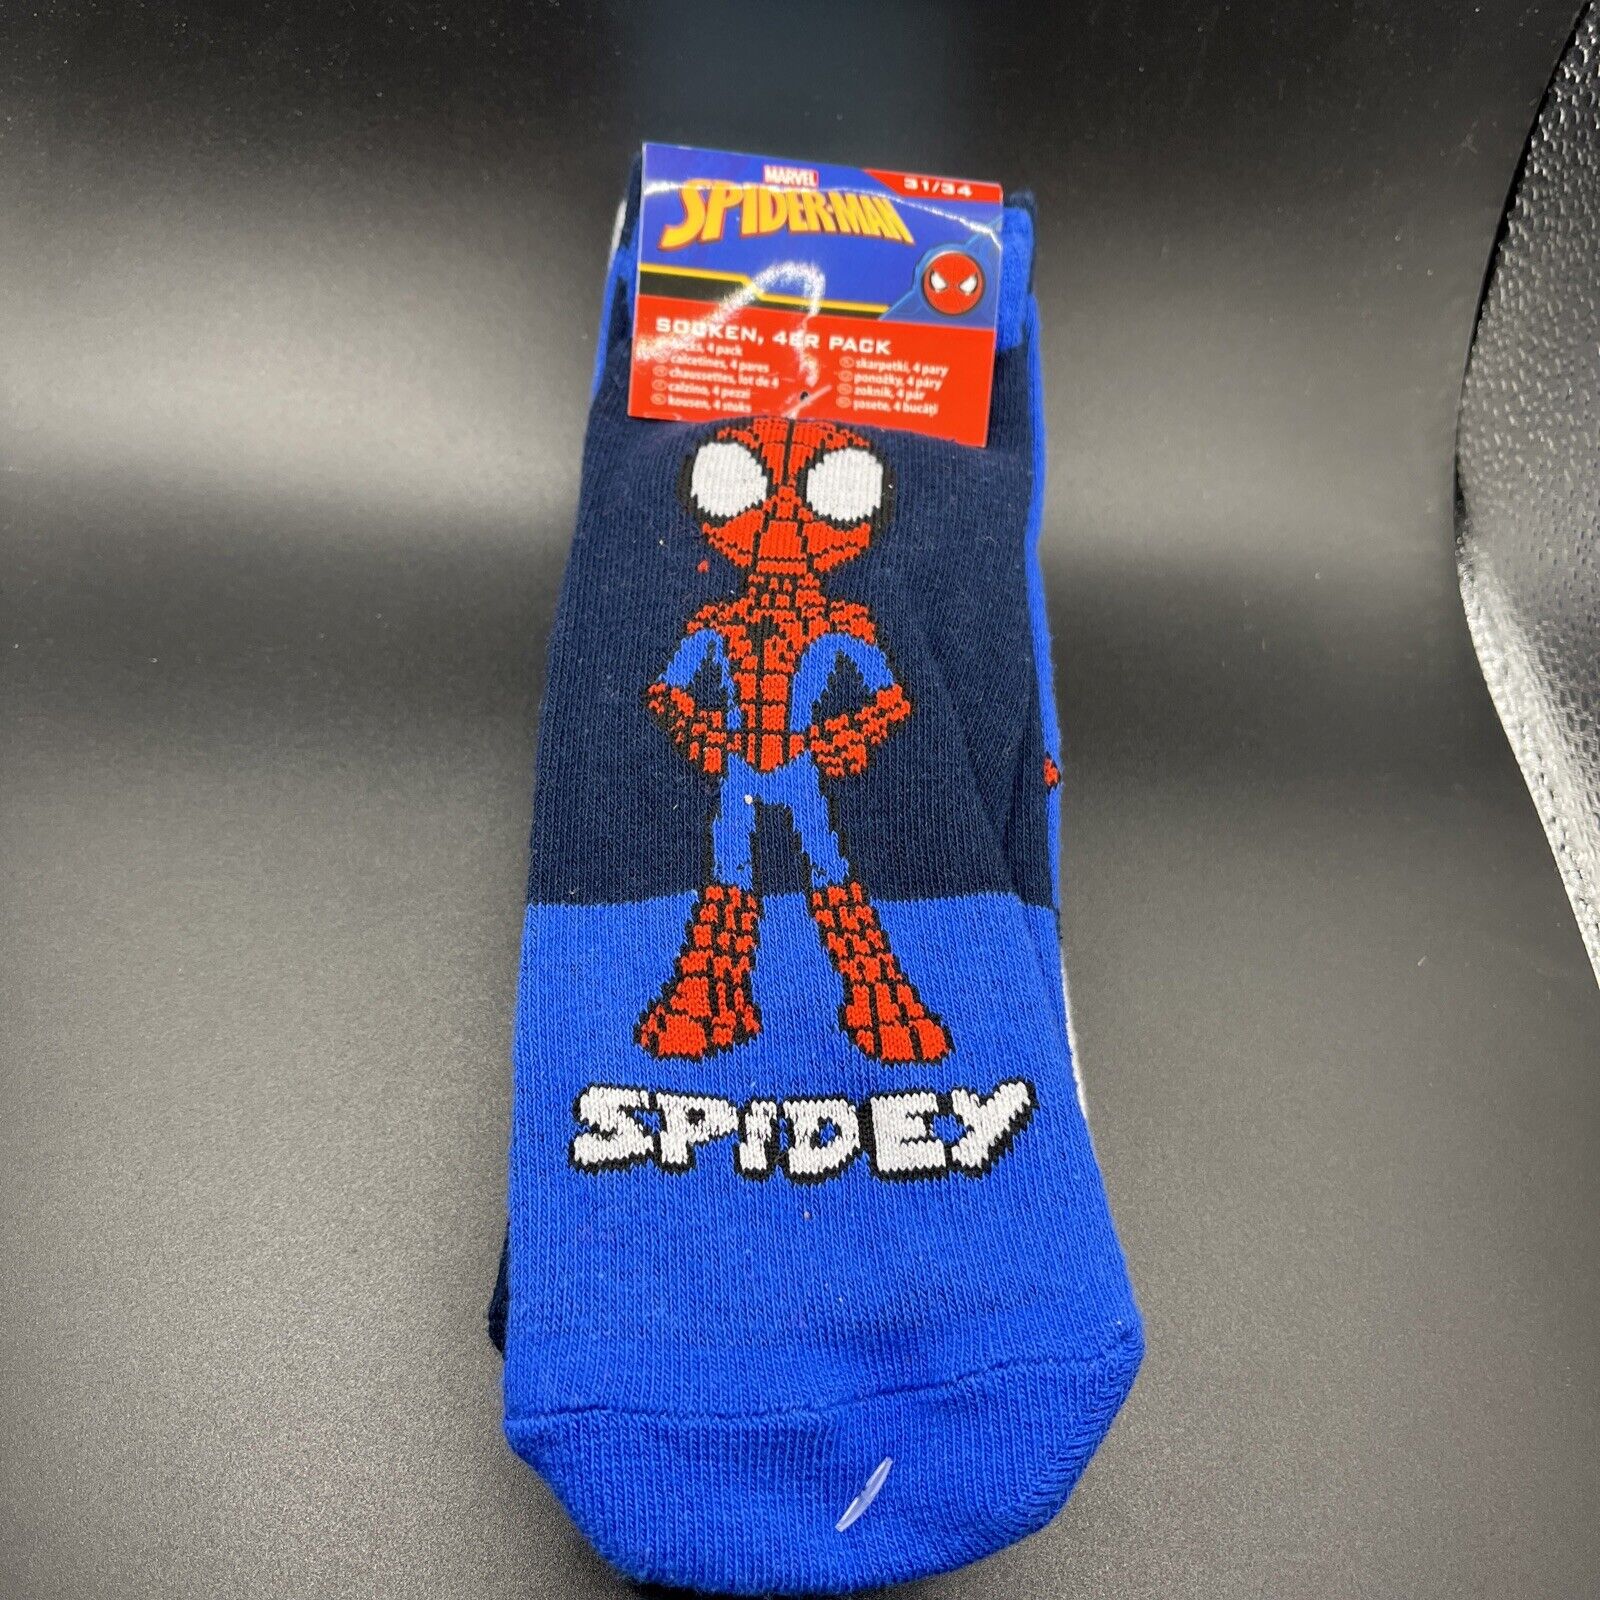 Youth Marvel 4 Pack of Socks Size 31/34  Fits Shoe 2.5-6